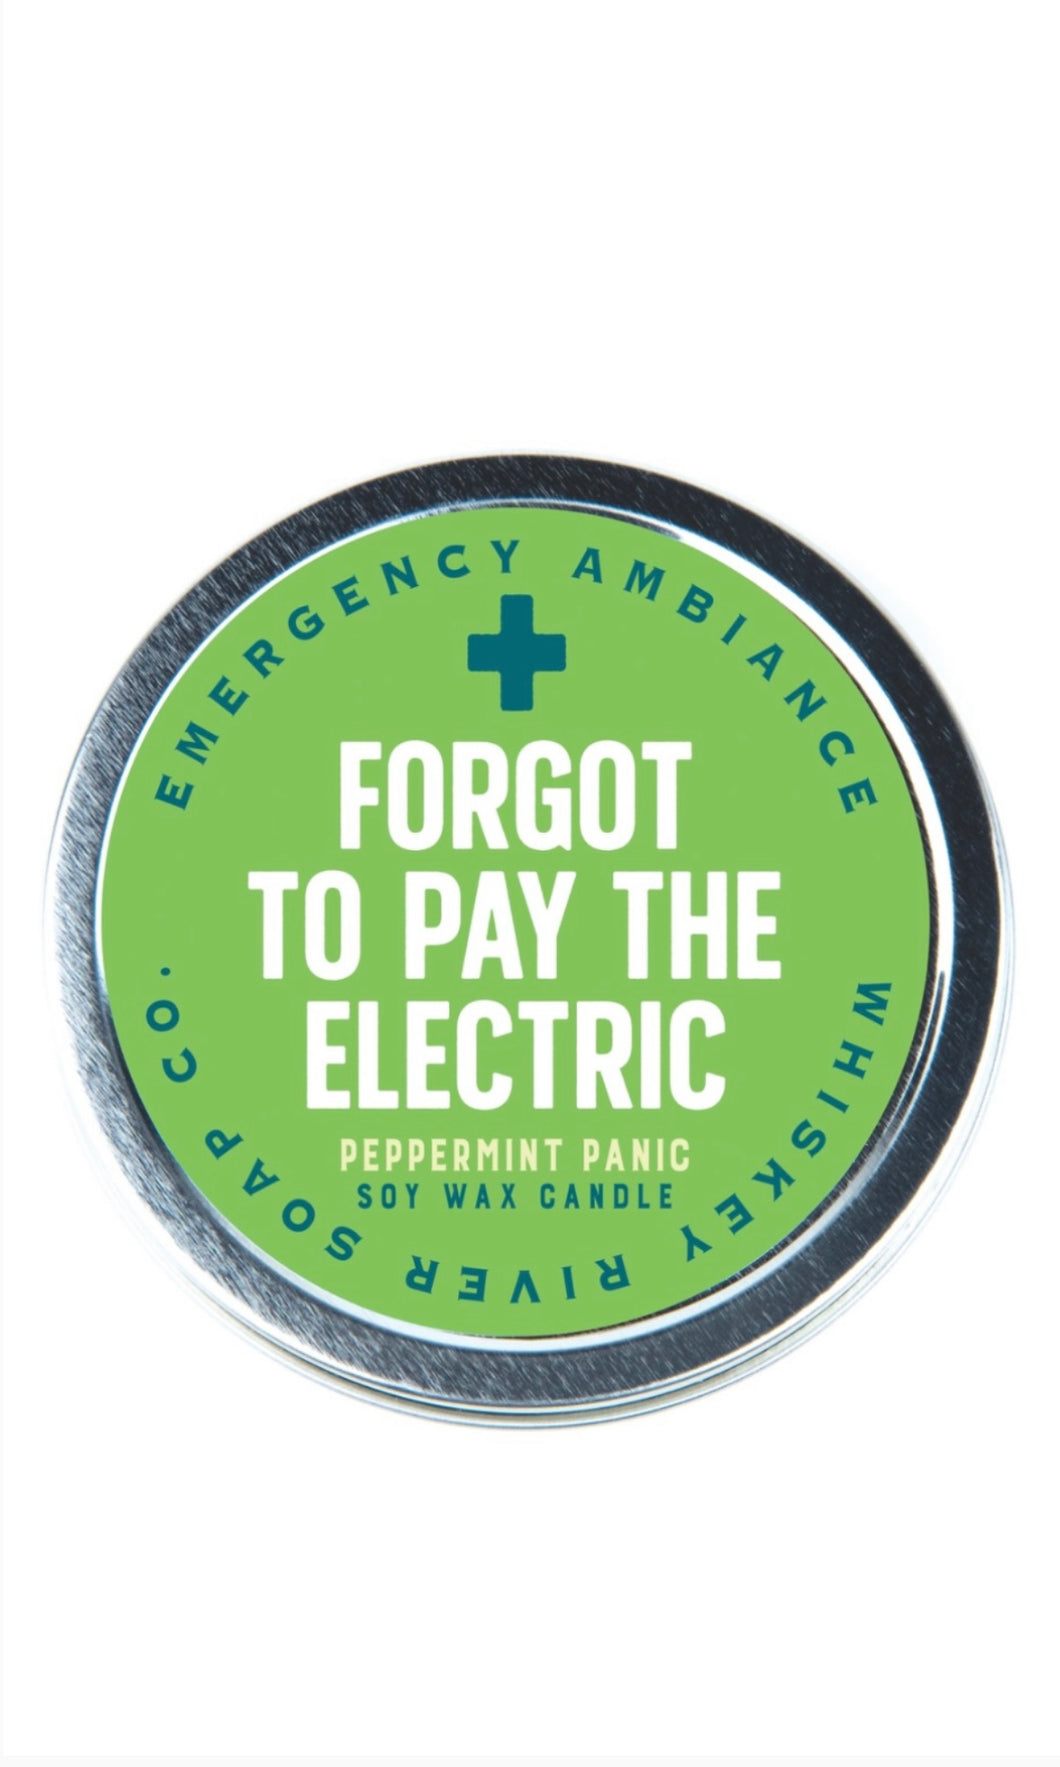 Whiskey - River “Forgot to Pay The Electric” Emergency Ambiance Tin Candles